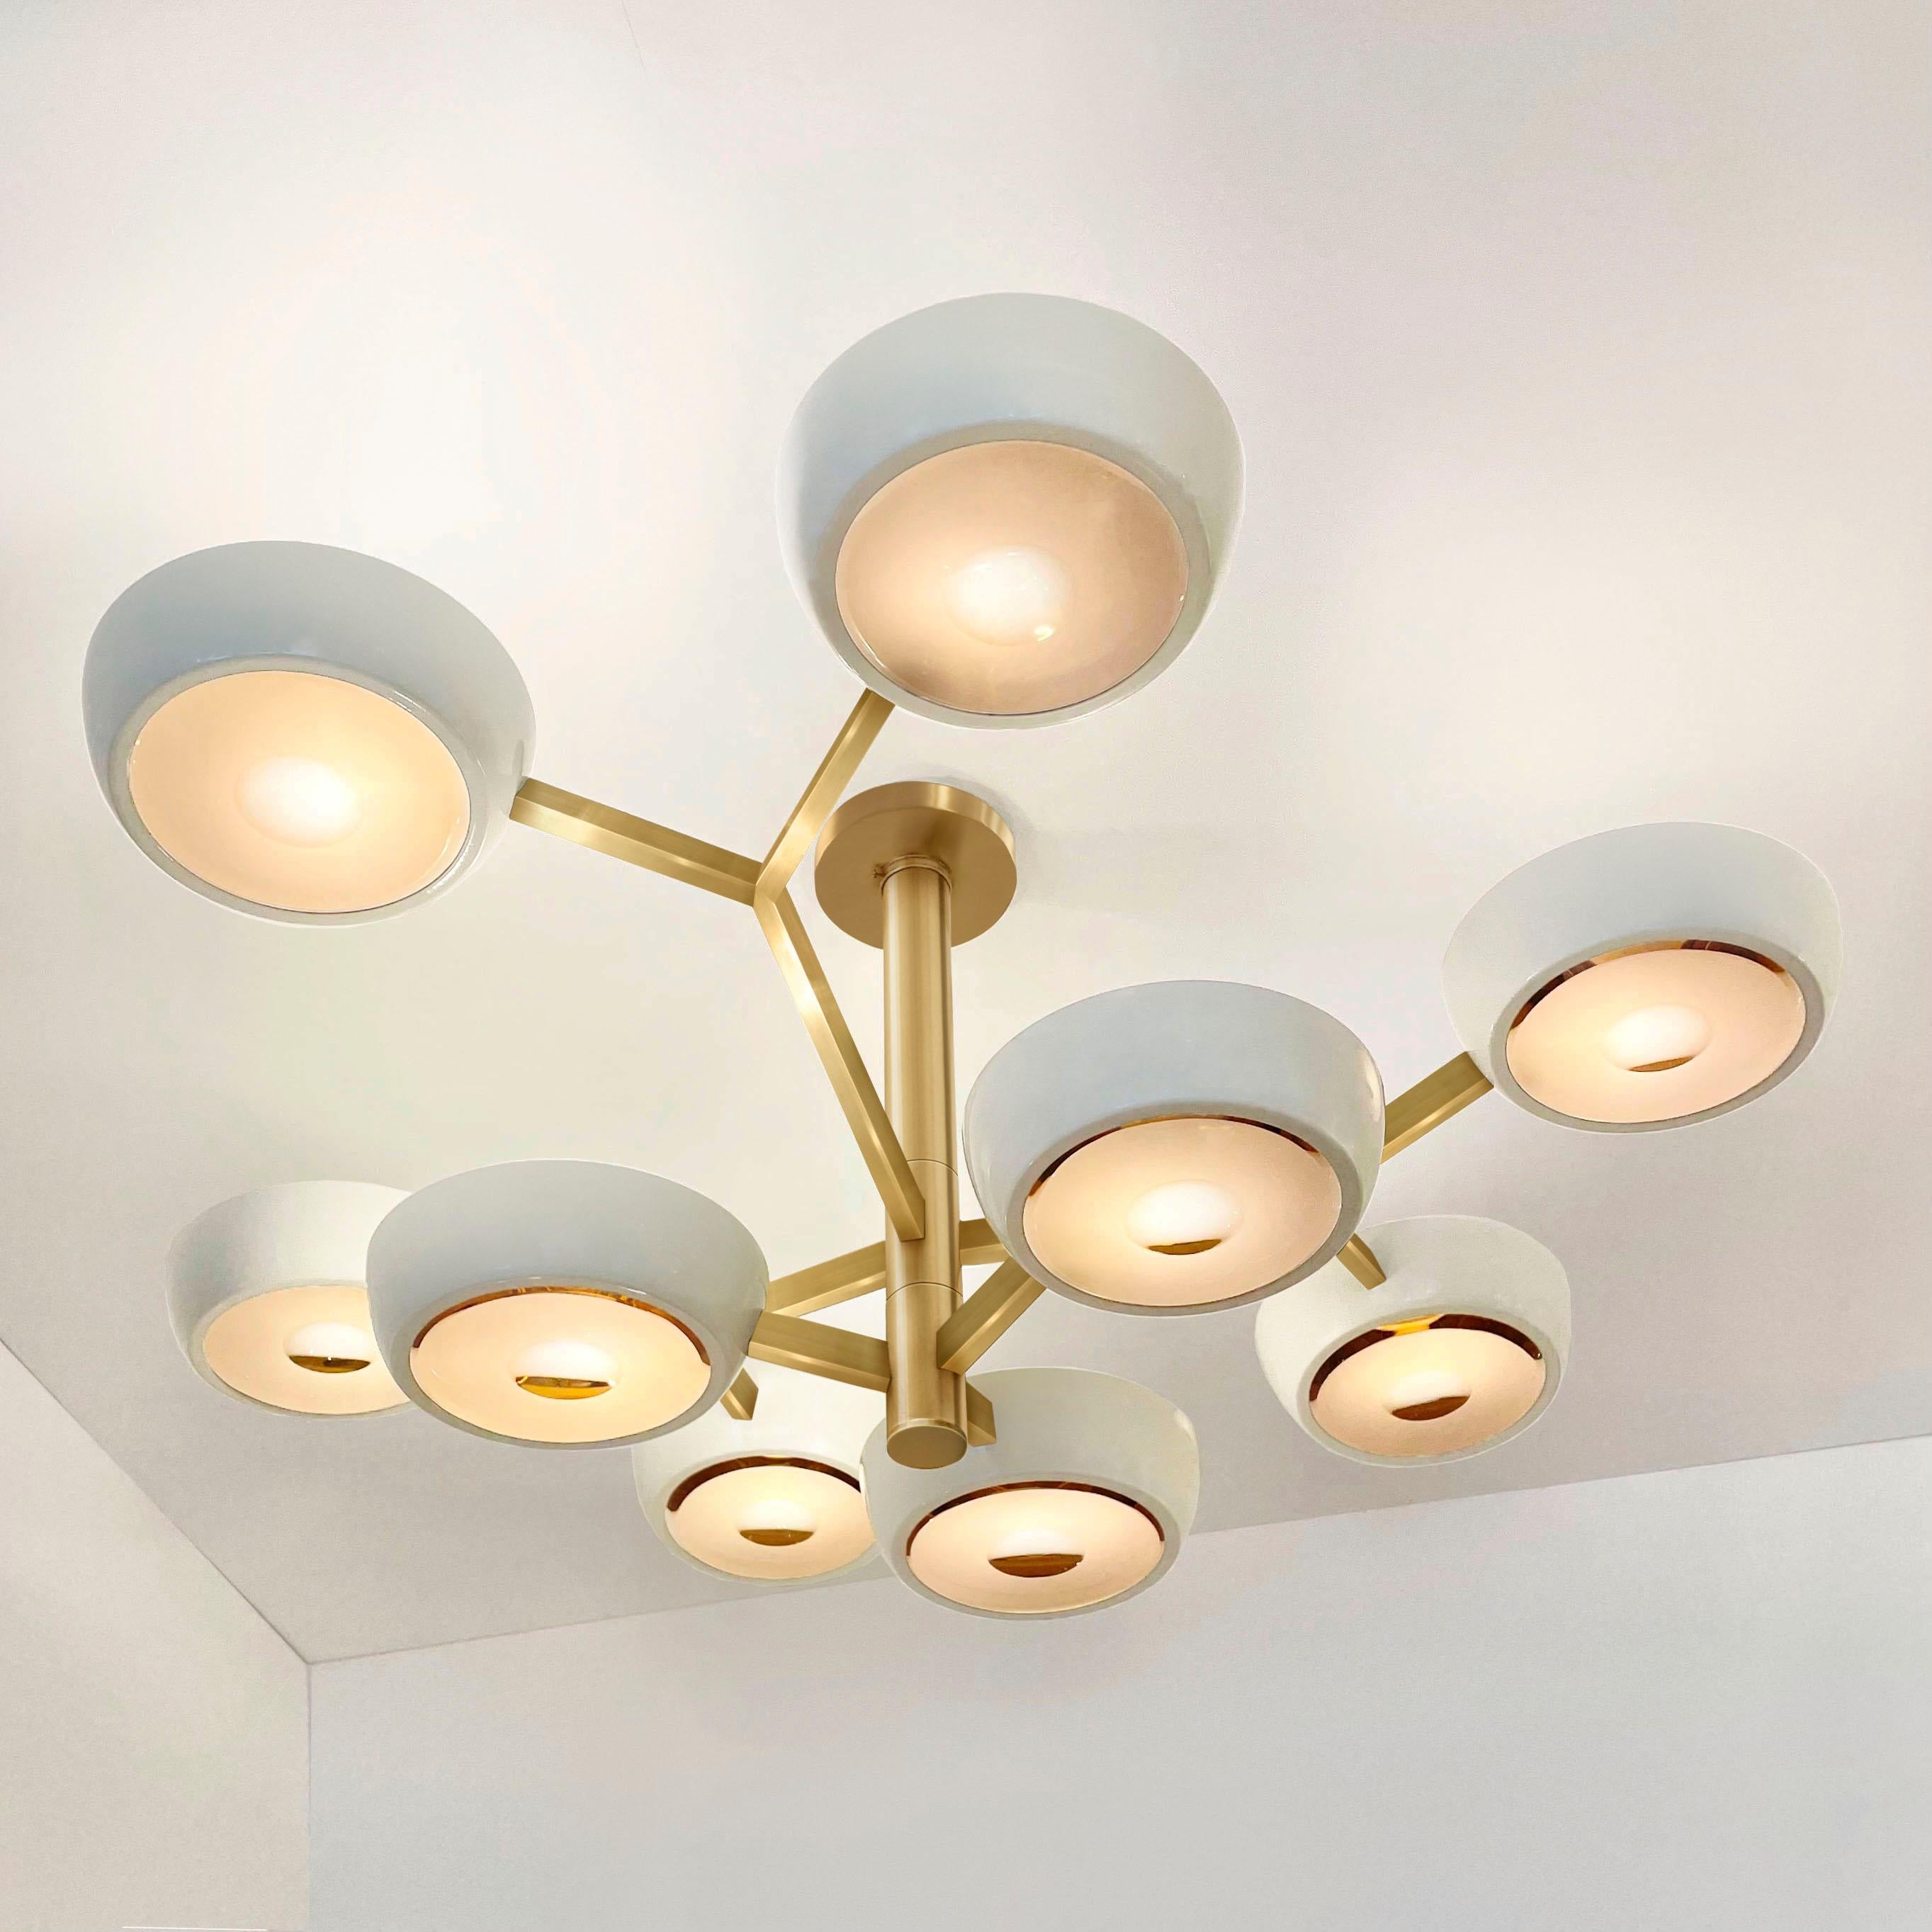 Modern Rose Ceiling Light by Gaspare Asaro-Satin Brass Finish For Sale